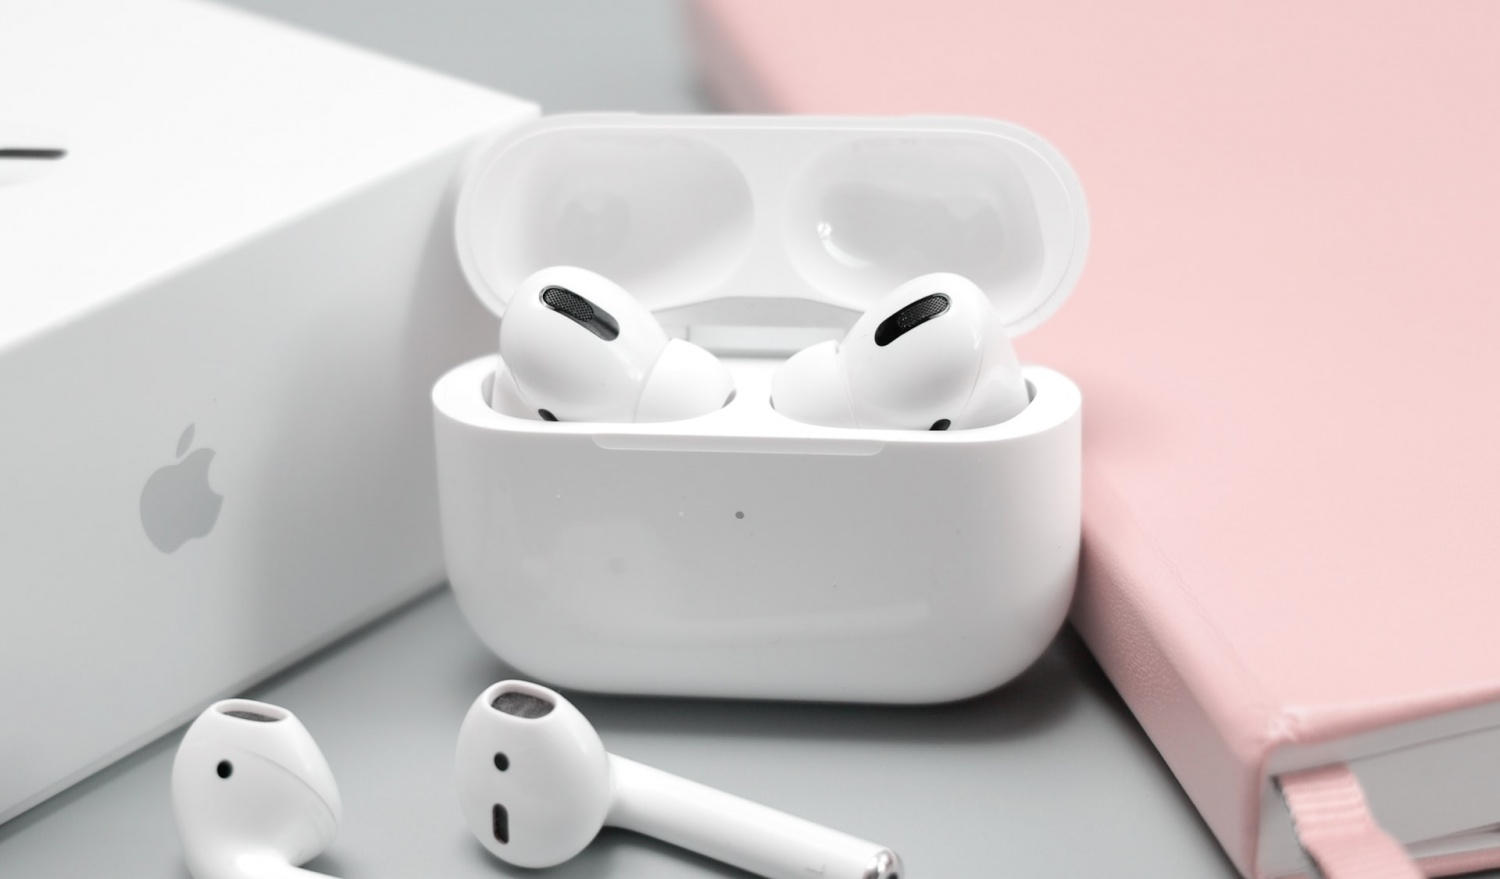 Worried About Your Lost AirPods? Apple Reveals New Tracking Solution!